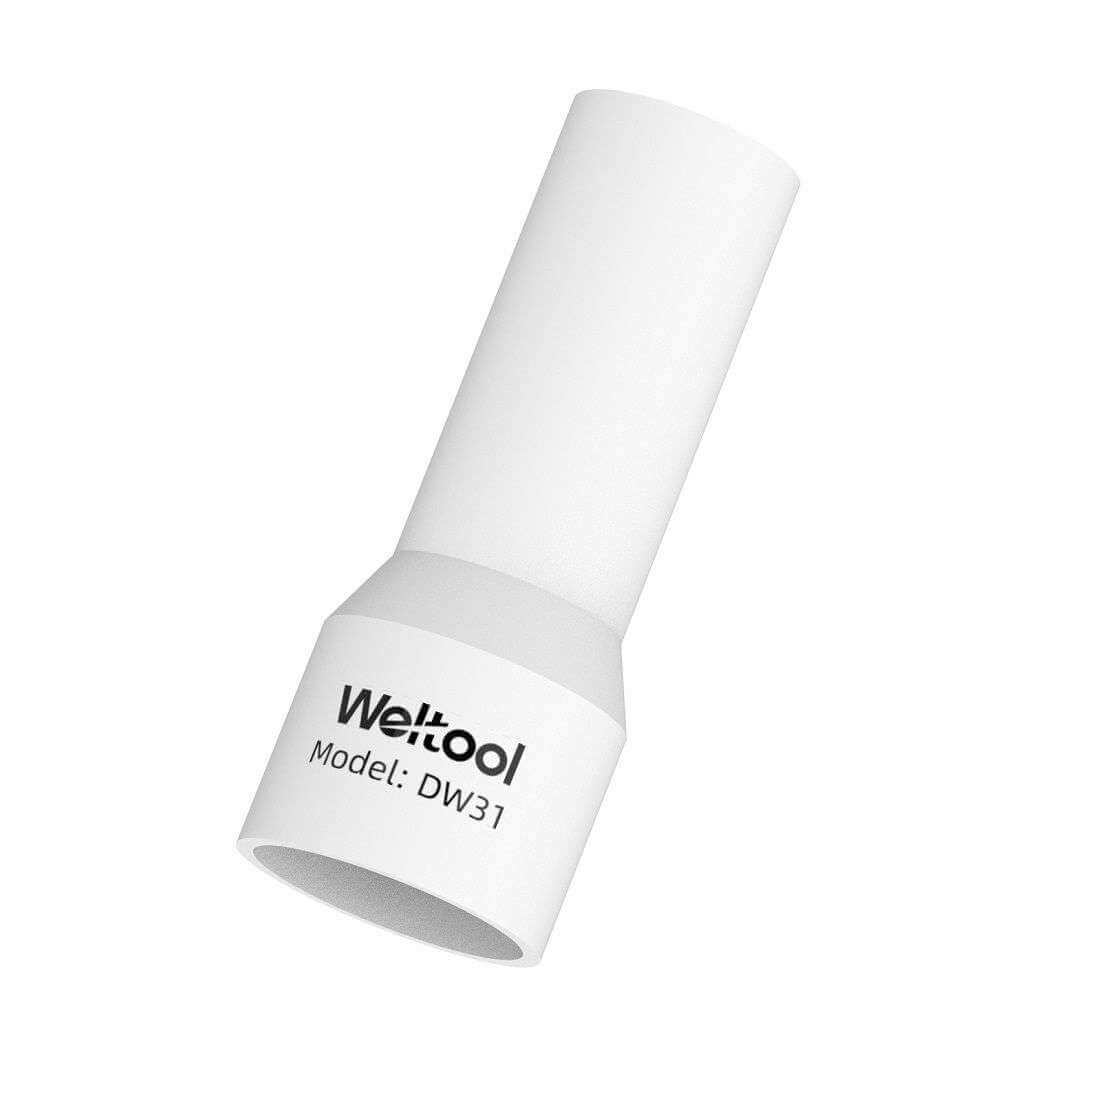 Weltool DW31 Diffusion Wand for T17